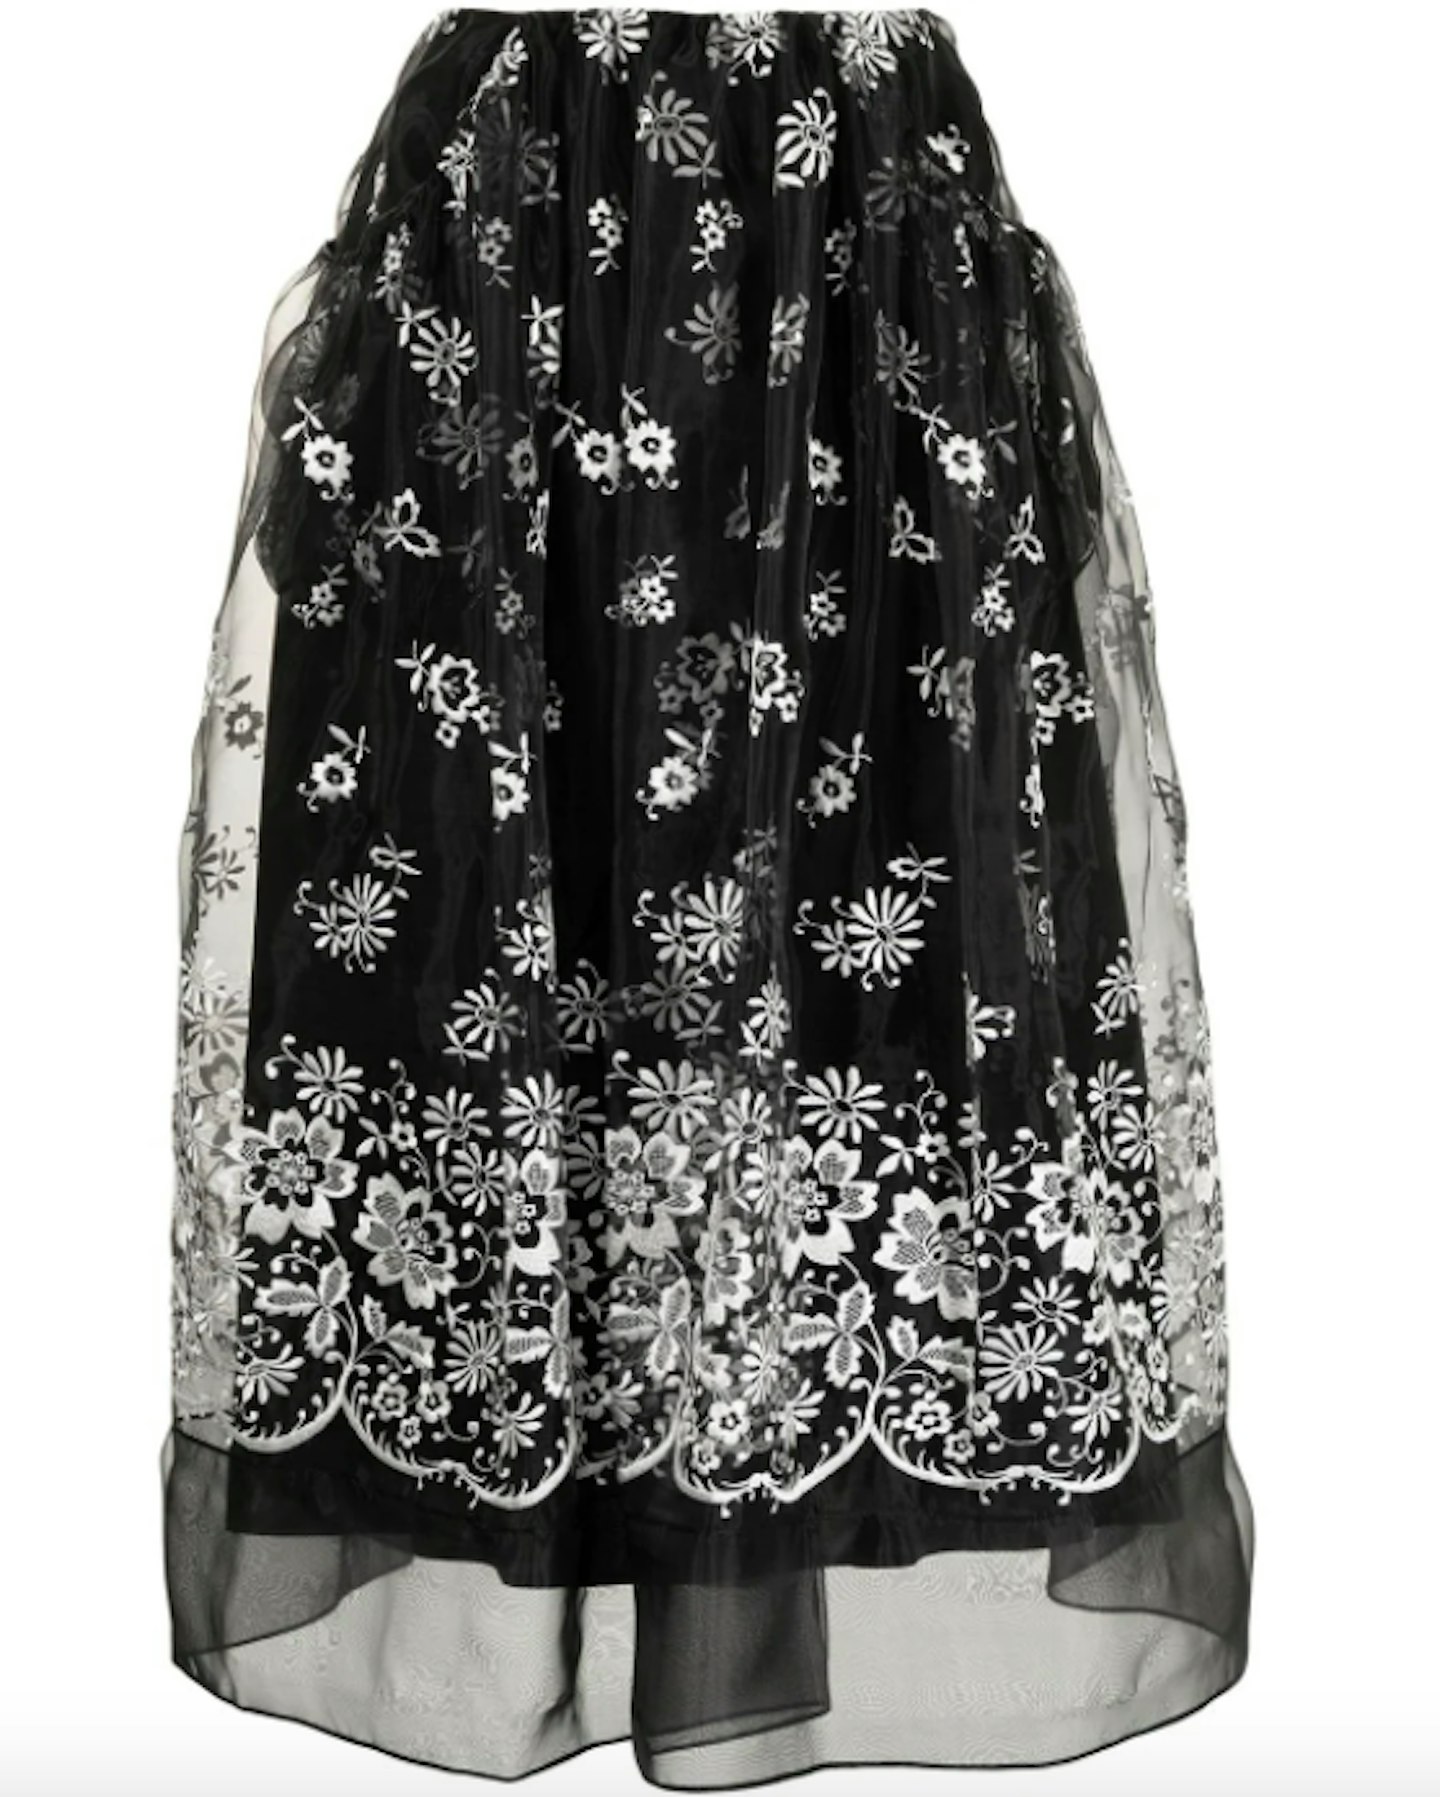 Simone Rocha, Floral-Embroidered organza Skirt, £995 at Farfetch